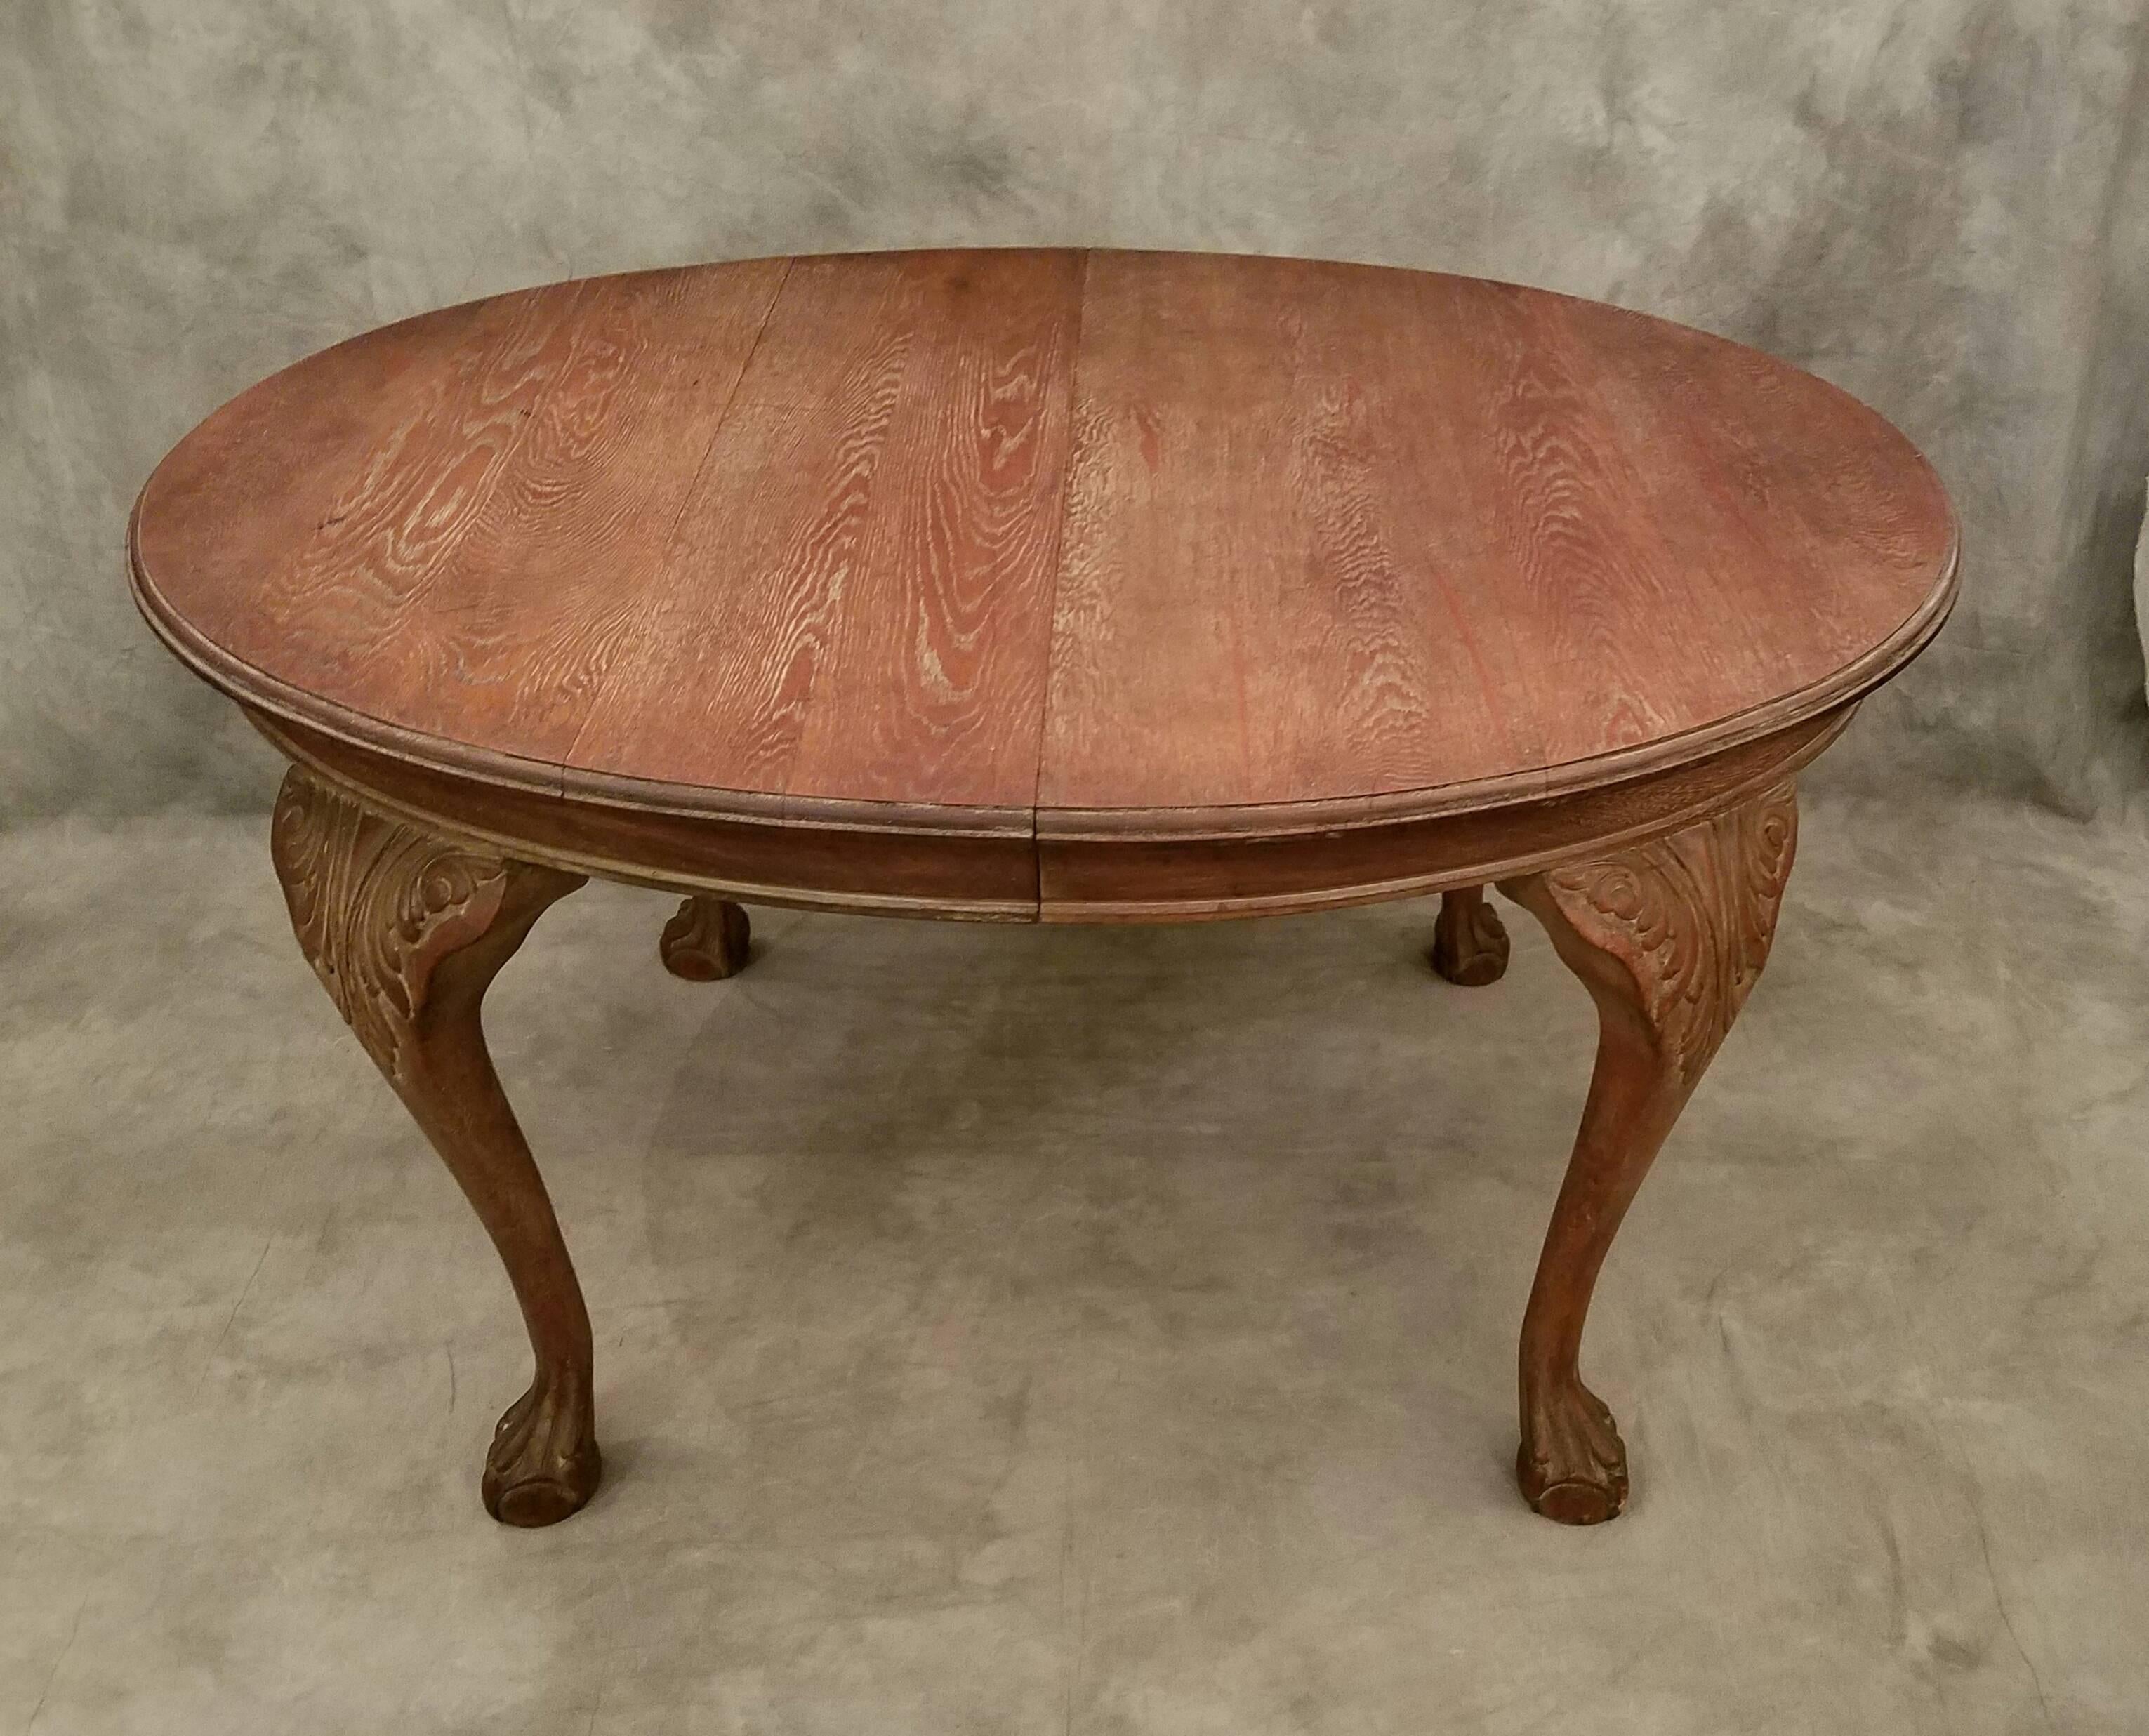 Large oval Chippendale carved oak dining table with two leaves, carved knees on cabriole legs ending with claw-and-ball feet. 

Measures: Height 31